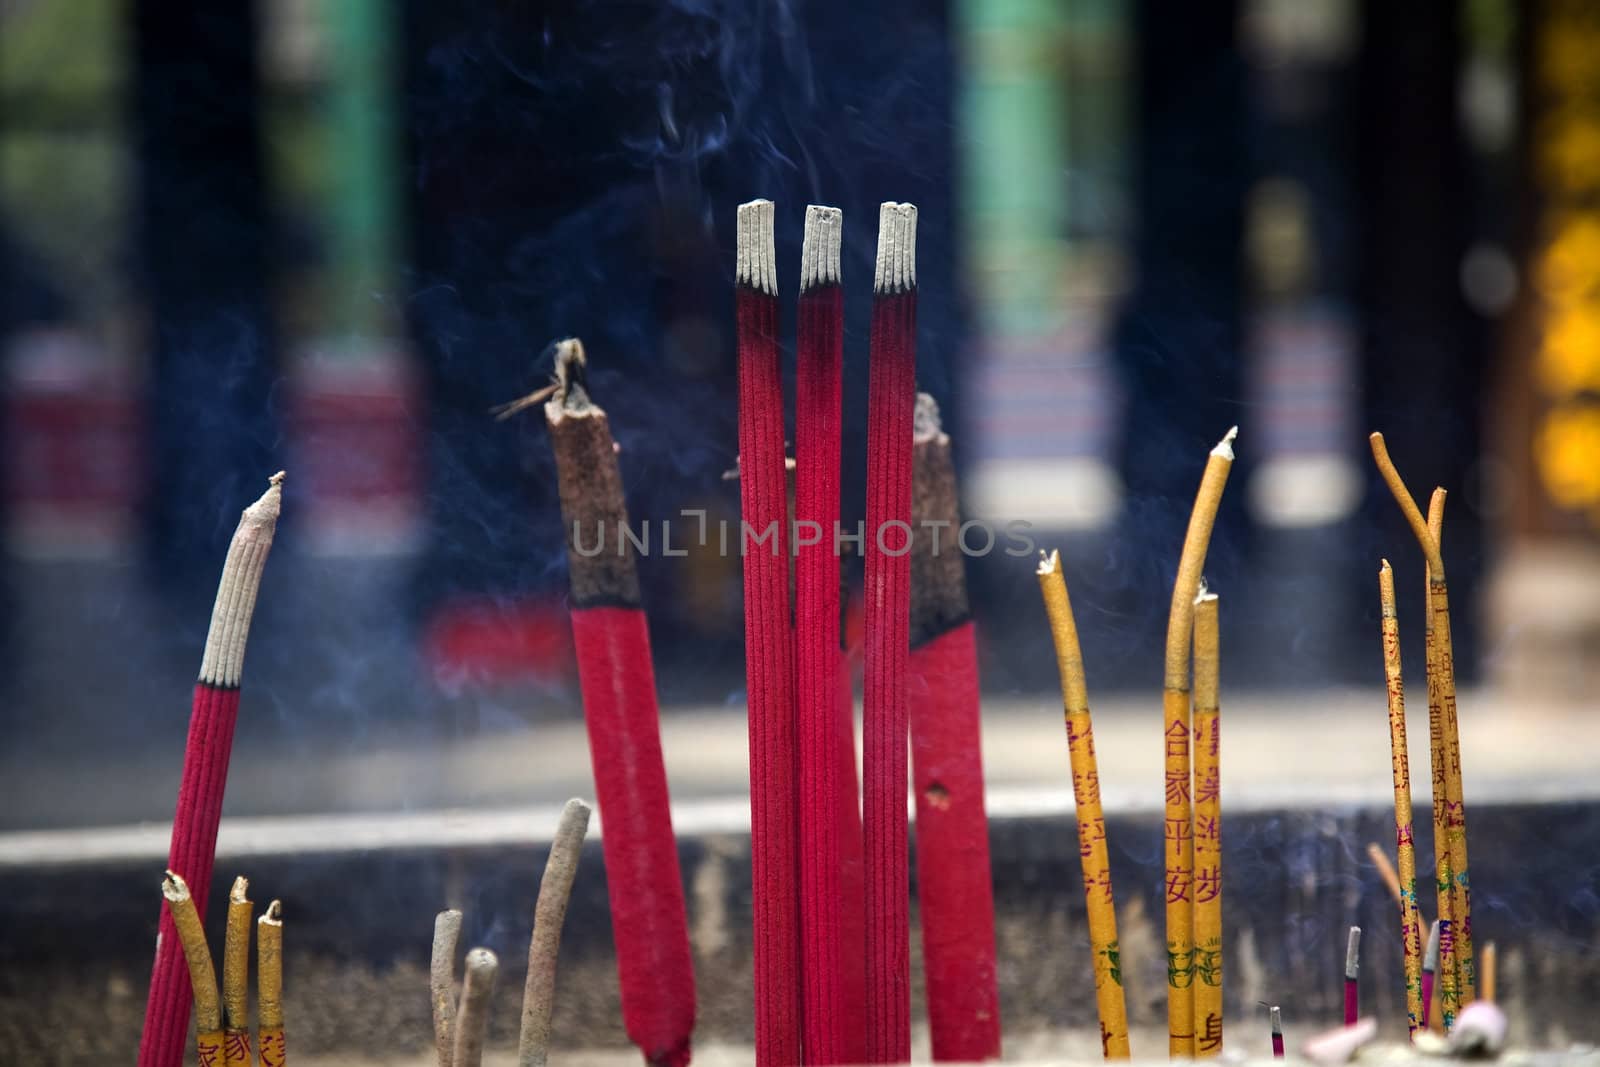 Smoking Incense Sticks Baoguang Si Shining Treasure Buddhist Temple Chengdu Sichuan China Front of Temple 
The Chinese characters on the sticks are not trademarks, but prayerful sayings, such as Peace in the Entire Home.